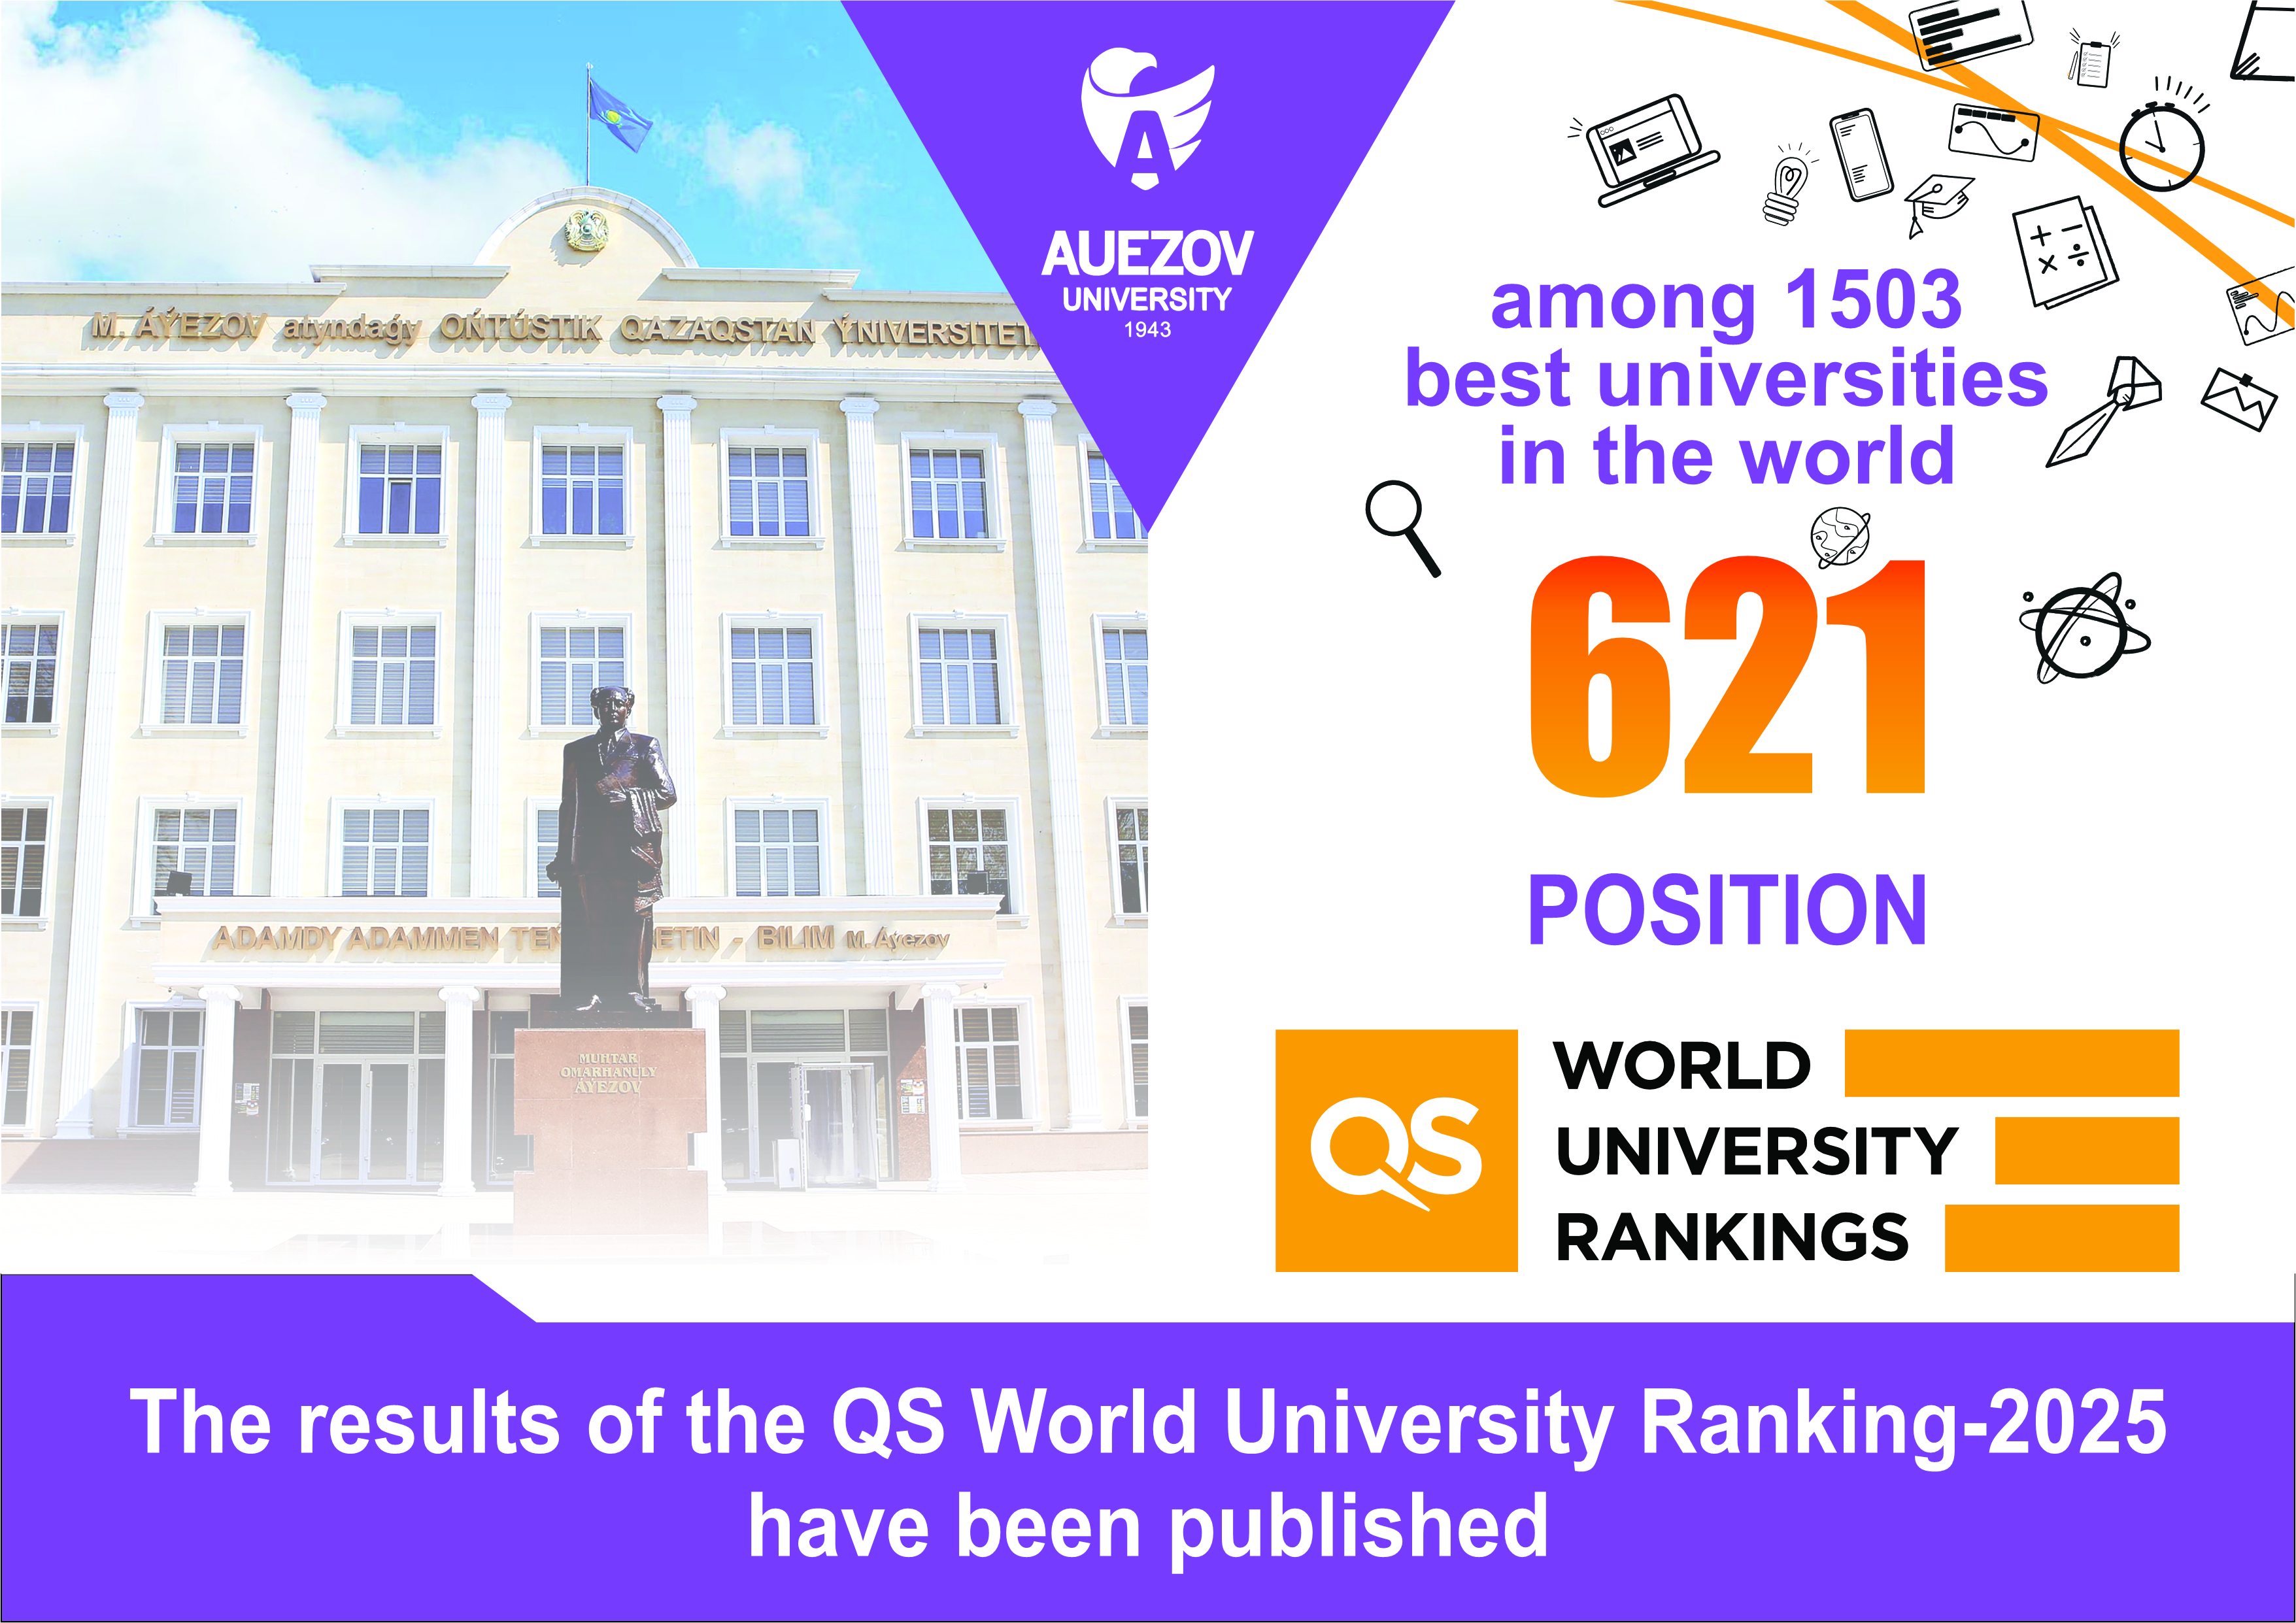 THE RESULTS OF THE QS WORLD UNIVERSITY RANKING-2025 HAVE BEEN PUBLISHED